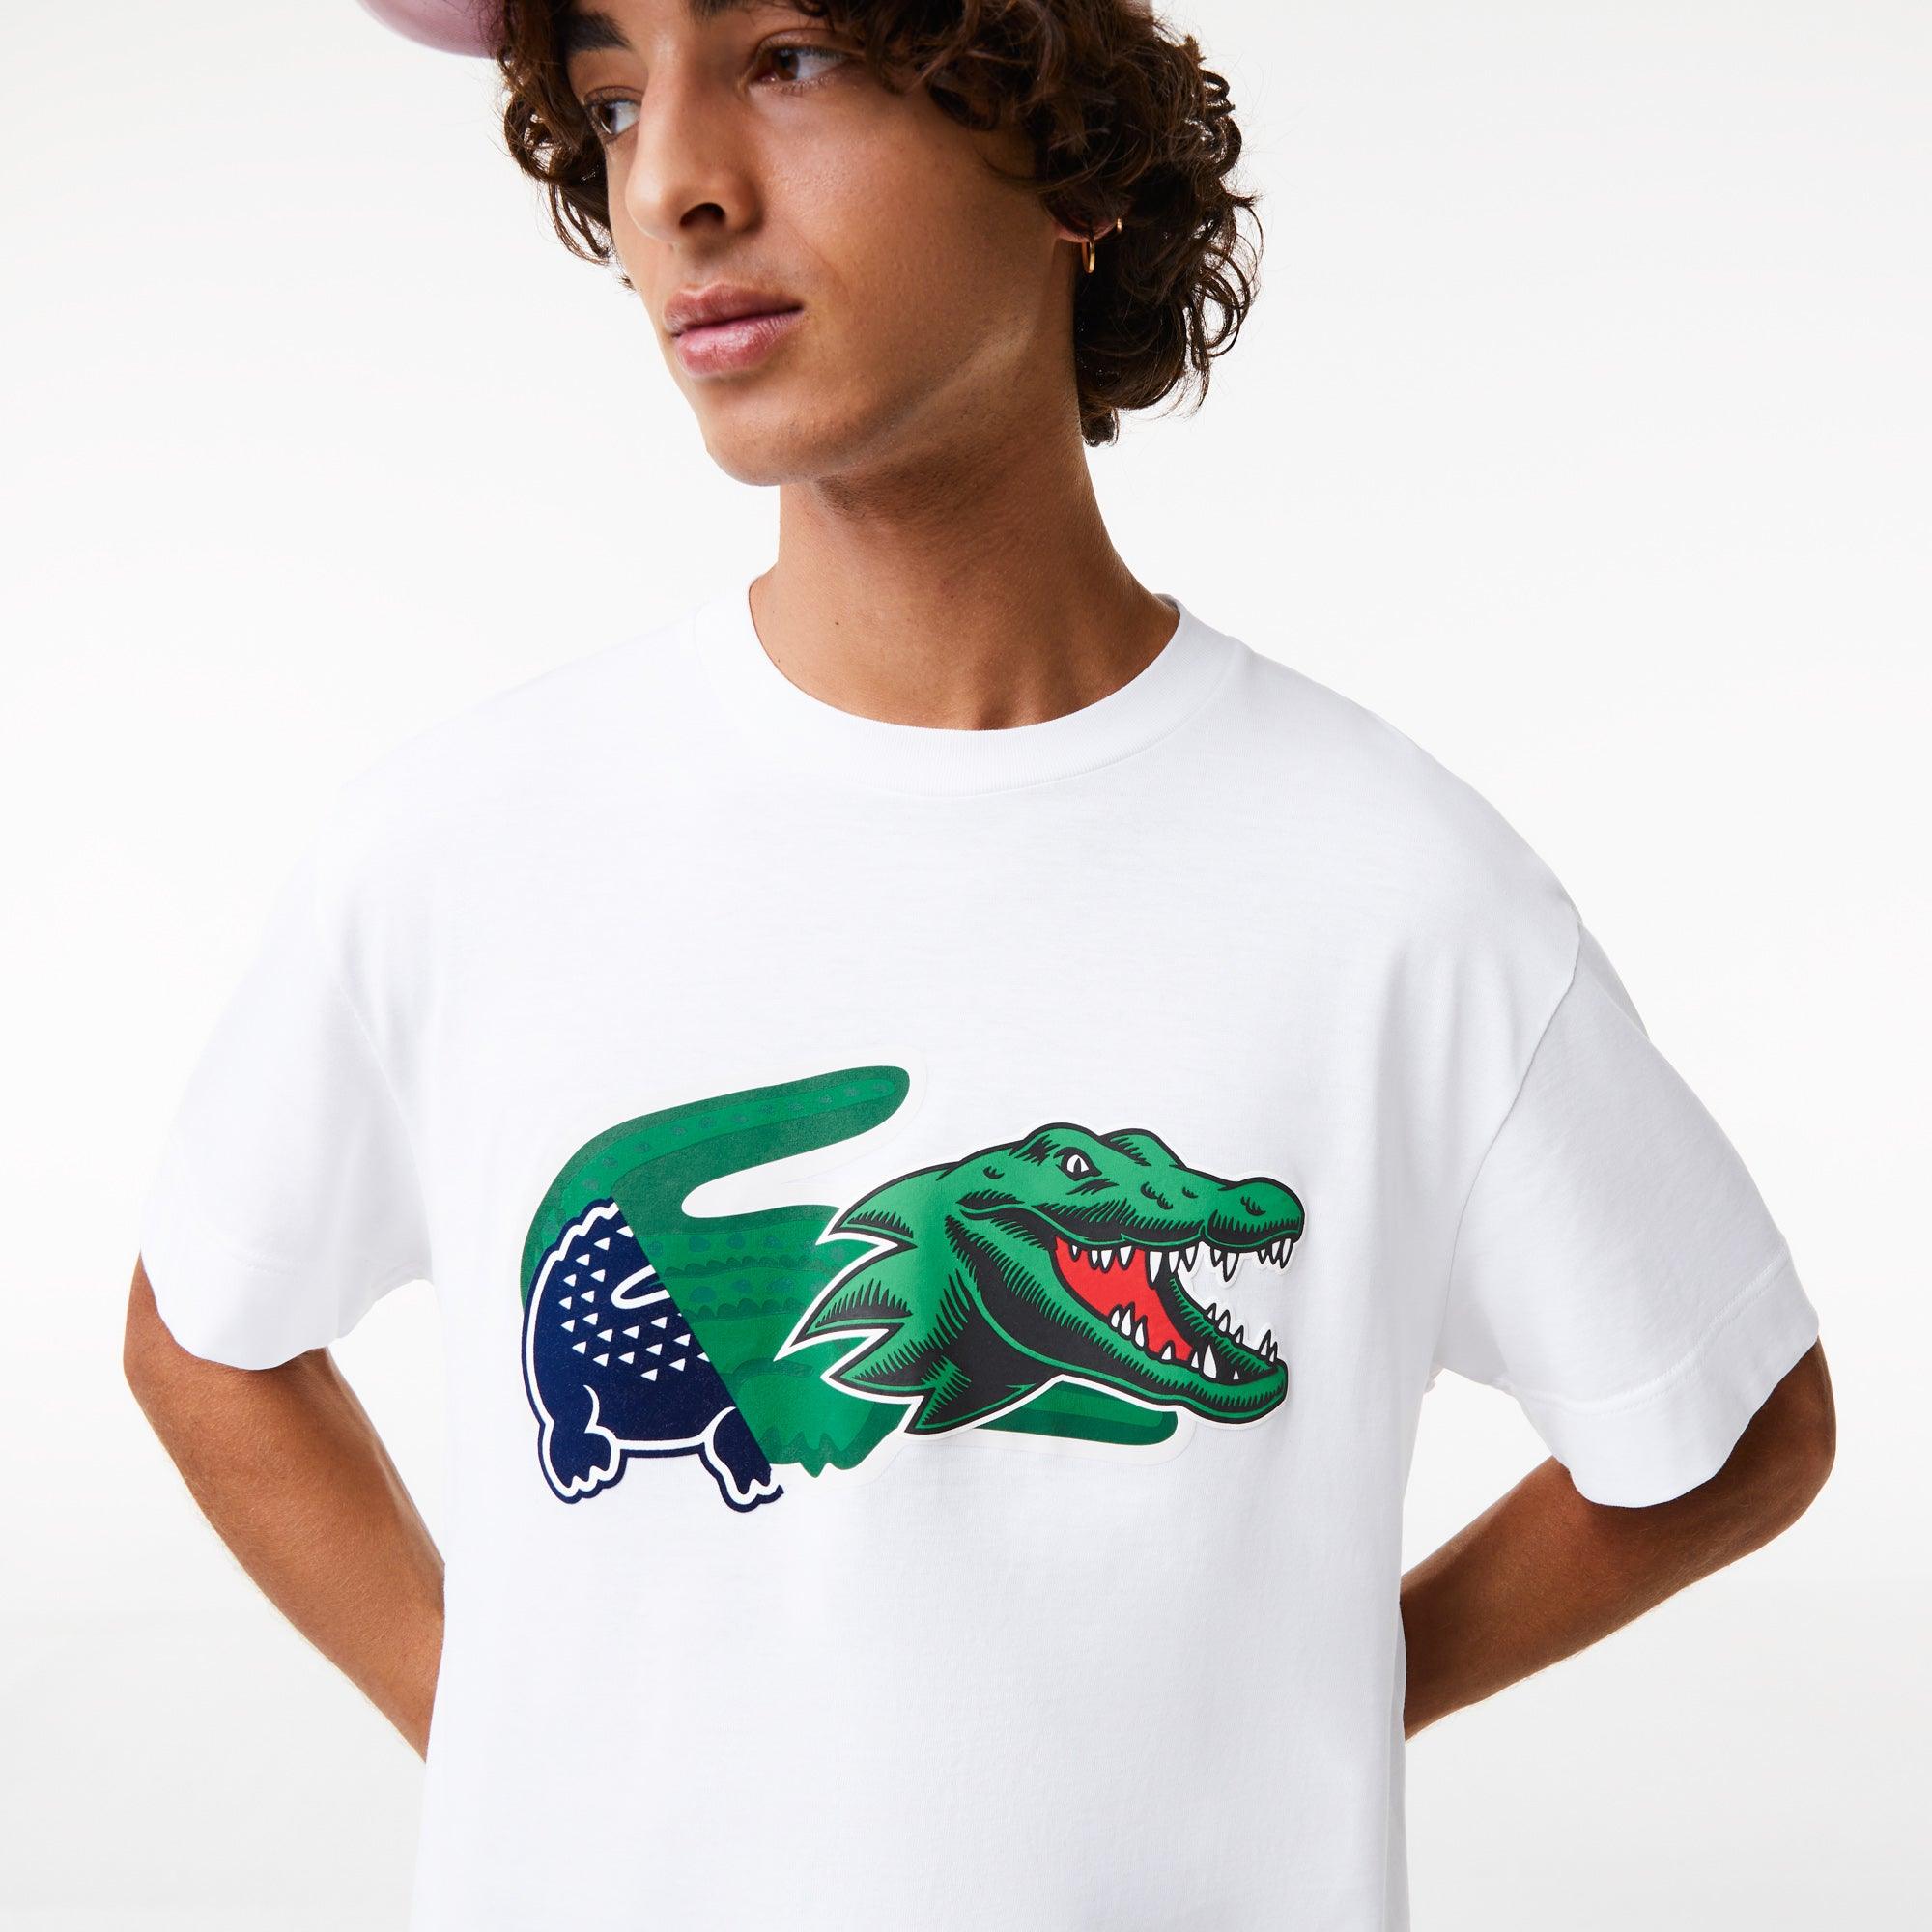 Sueter Lacoste Relaxed Fit Oversized Crocodile - tiendadicons.com